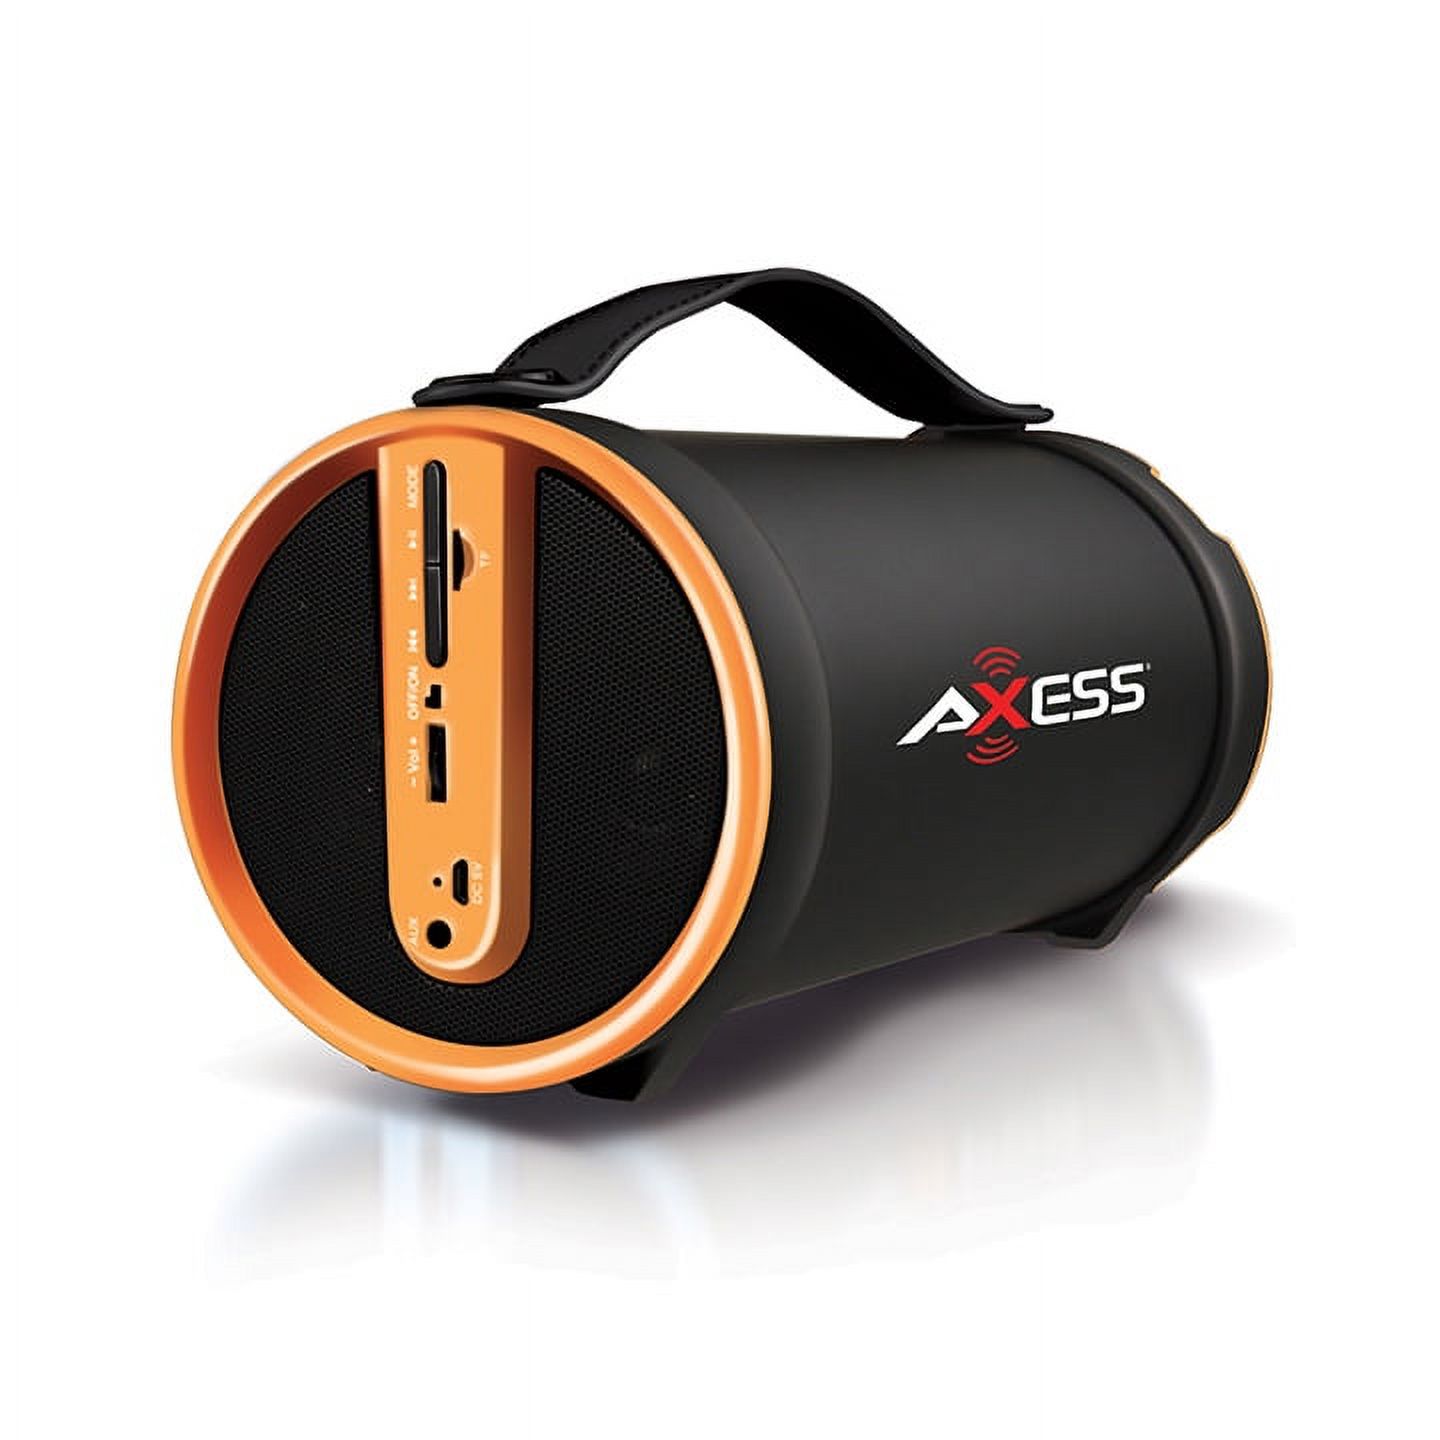 Axess Yellow Portable Bluetooth IndoorOutdoor 2.1 HiFi Cylinder Loud Speaker with BuiltIn 4 Inch Sub - image 1 of 2